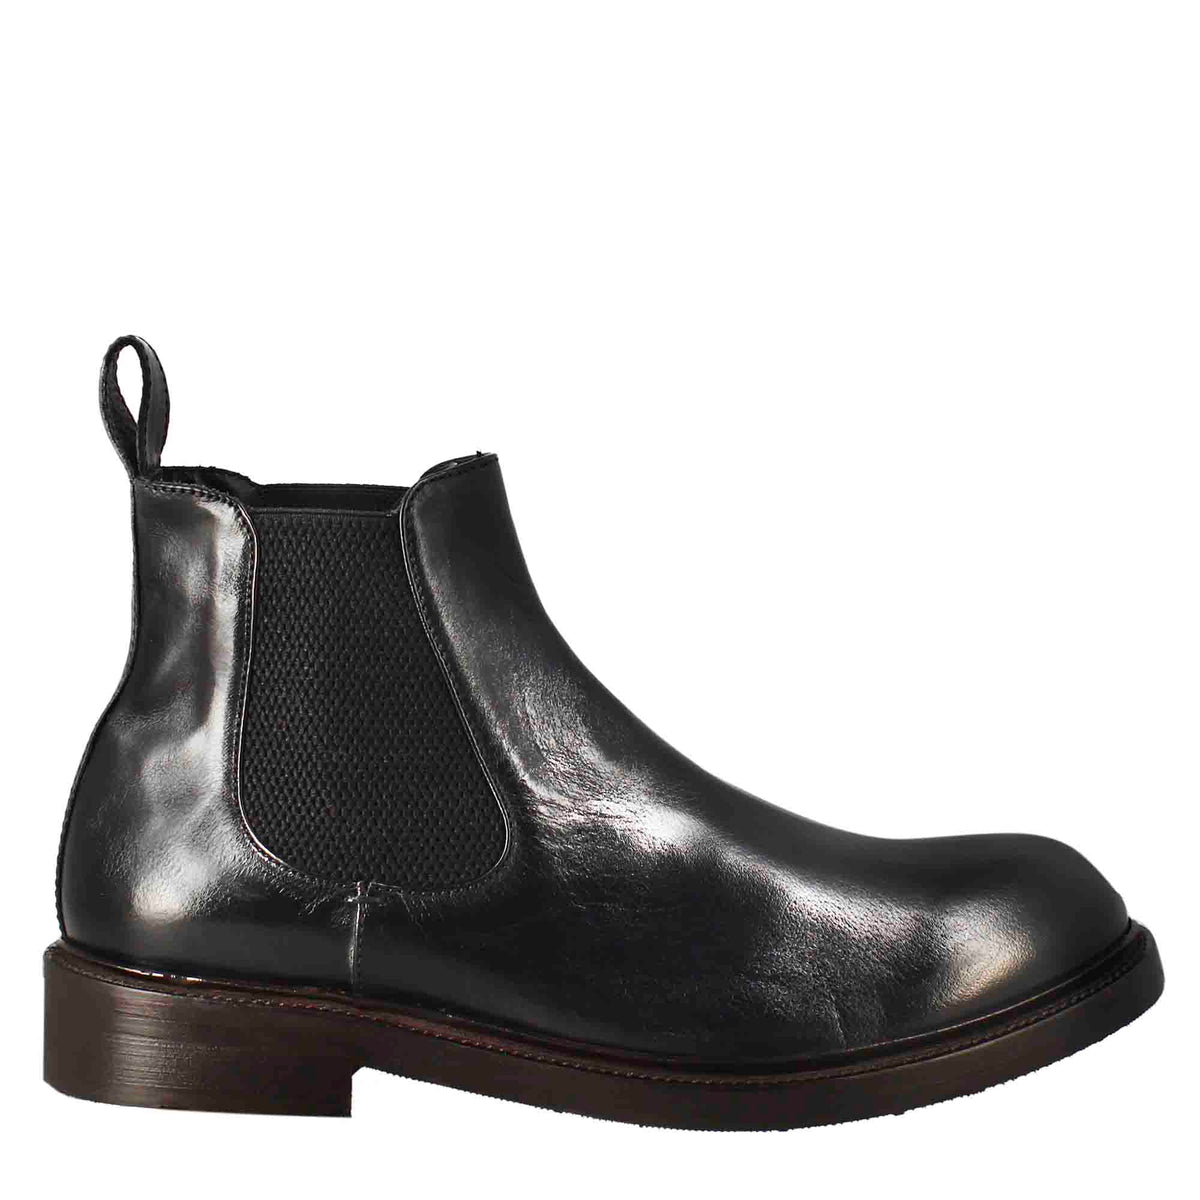 Men's Chelsea Diver boot in black washed leather